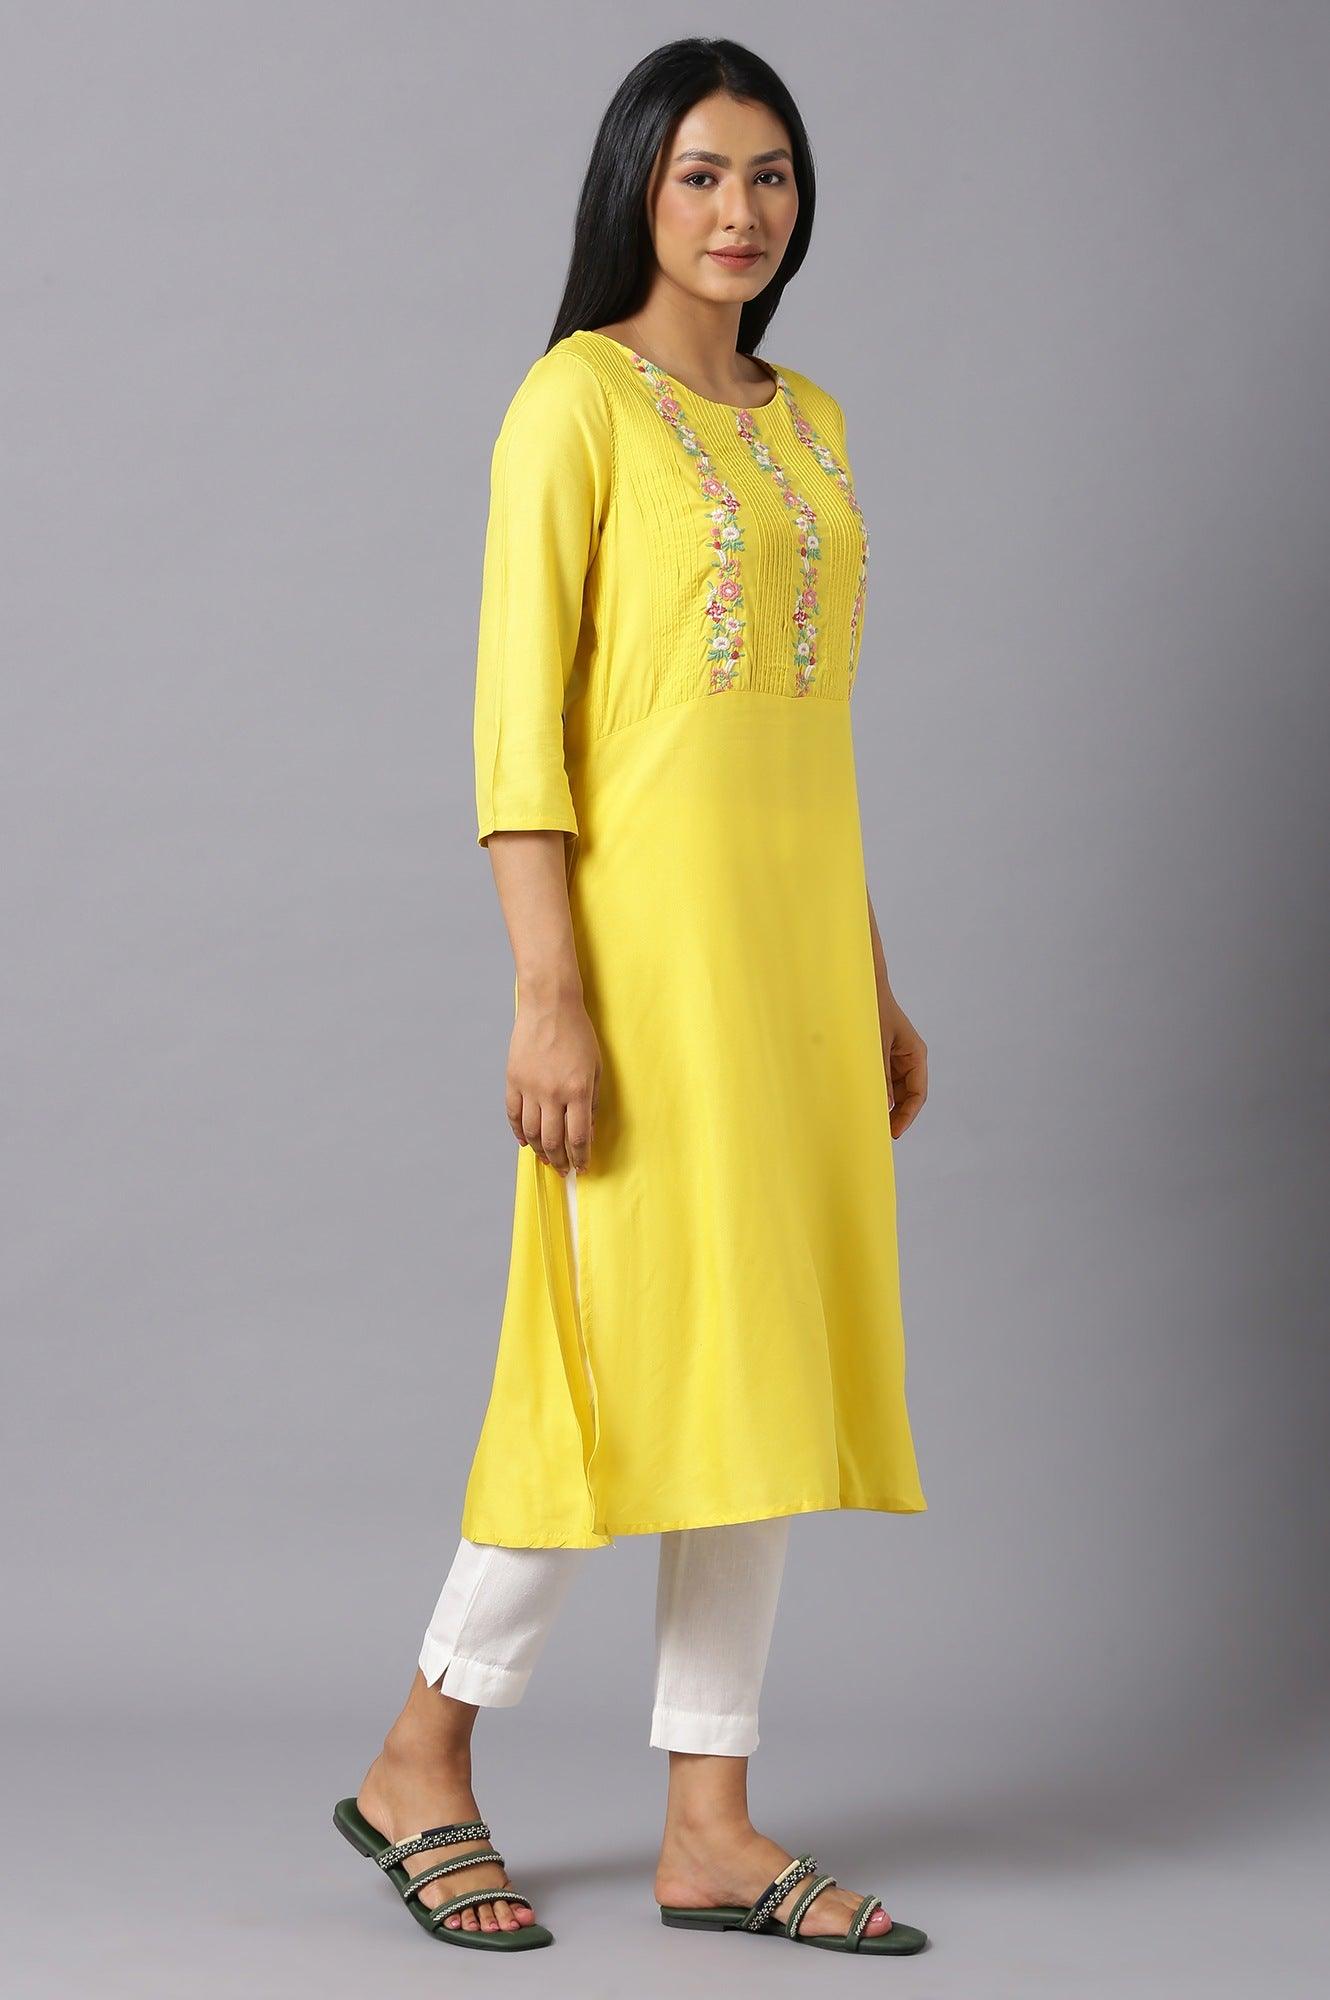 Yellow Embroidered kurta With Lace Trimming - wforwoman